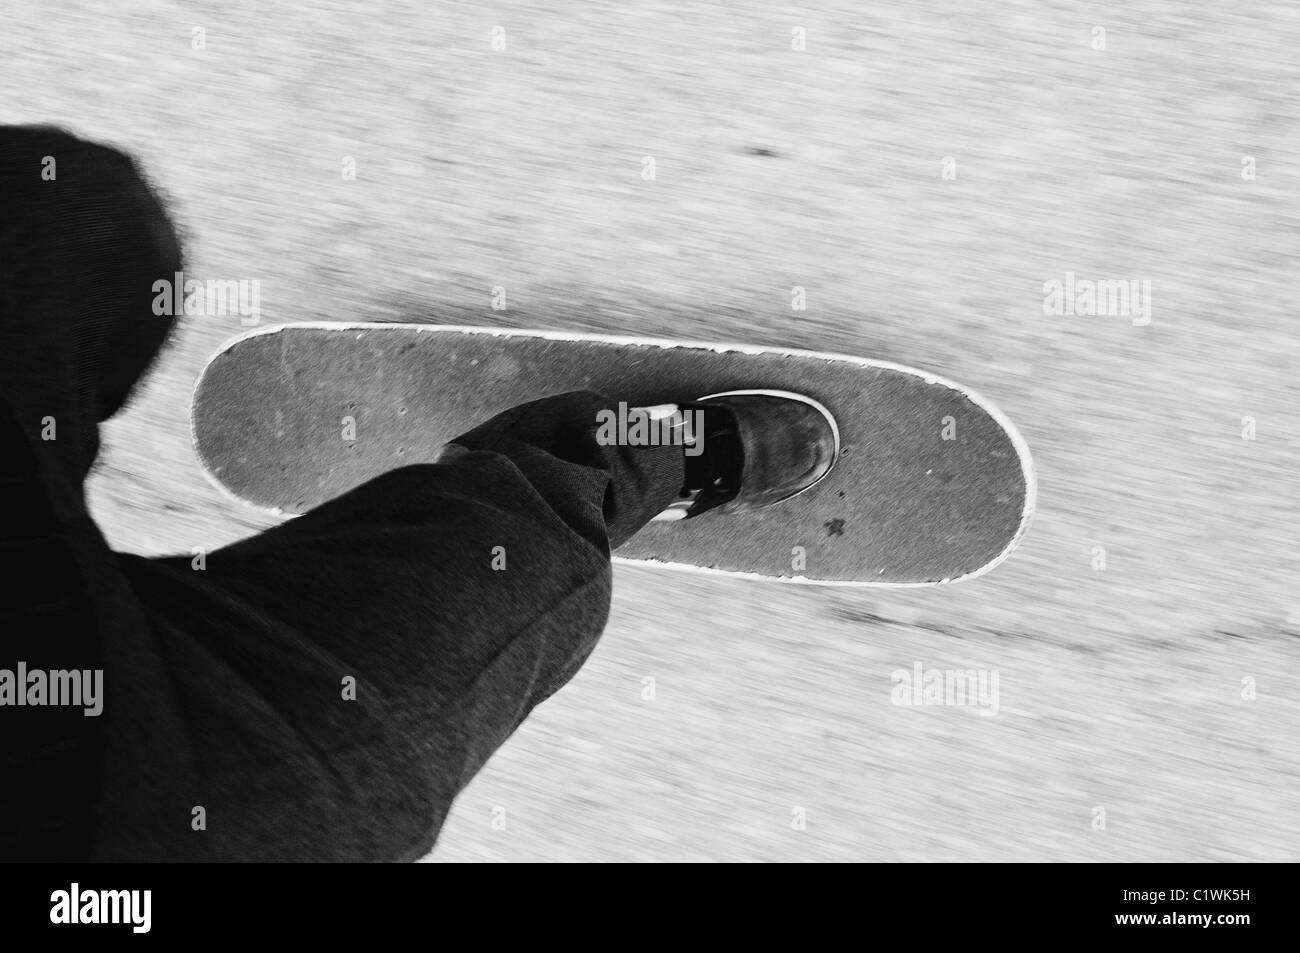 Low section view of a man skateboarding Stock Photo